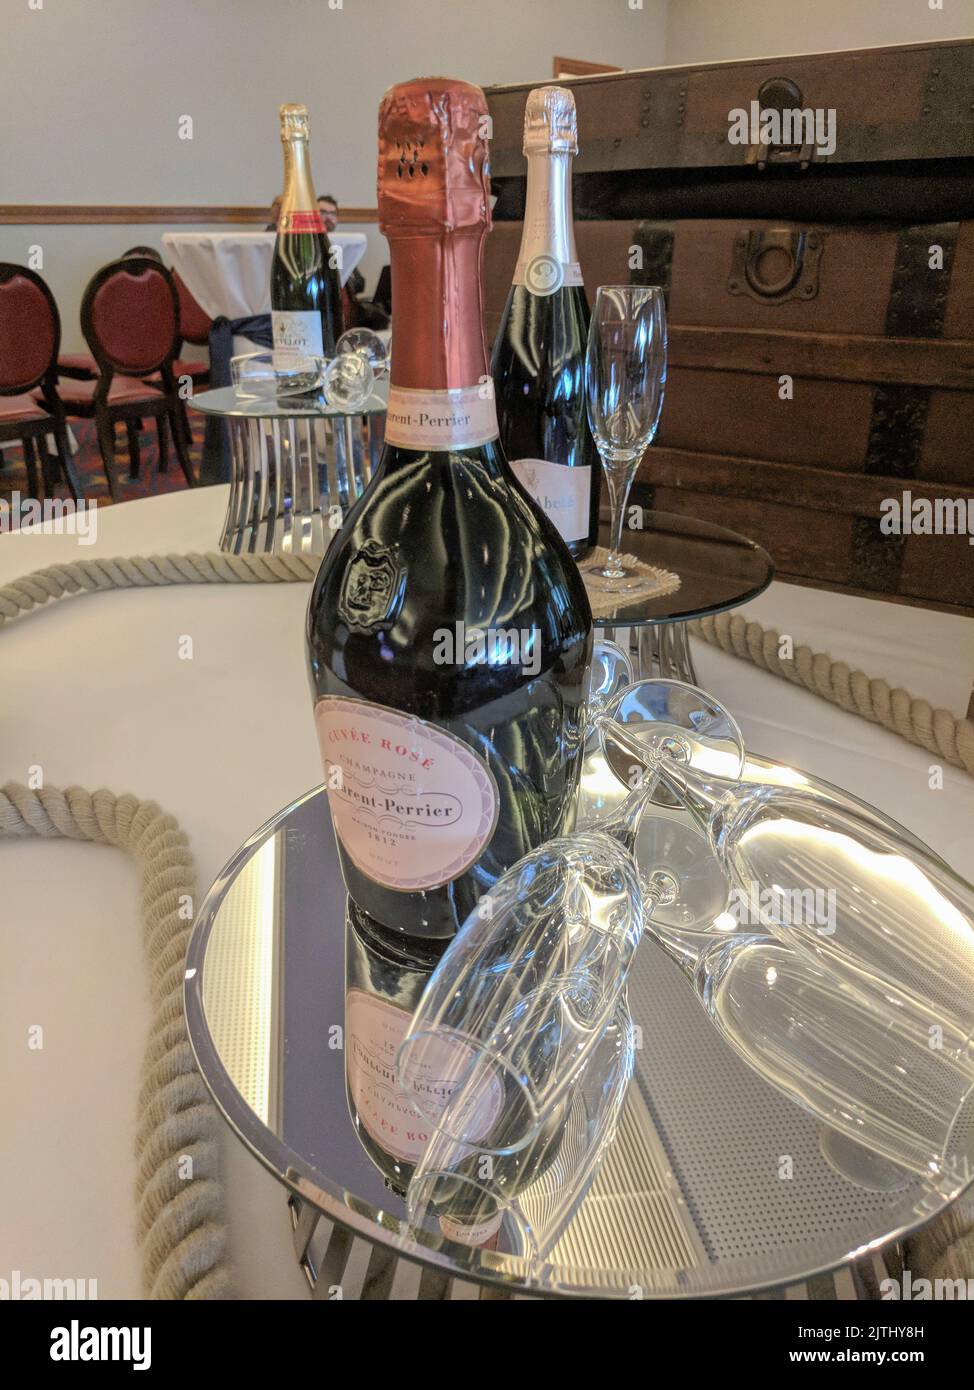 A bottle of Laurent-Perrier pink rose champagne, with two champagne glasses. Stock Photo